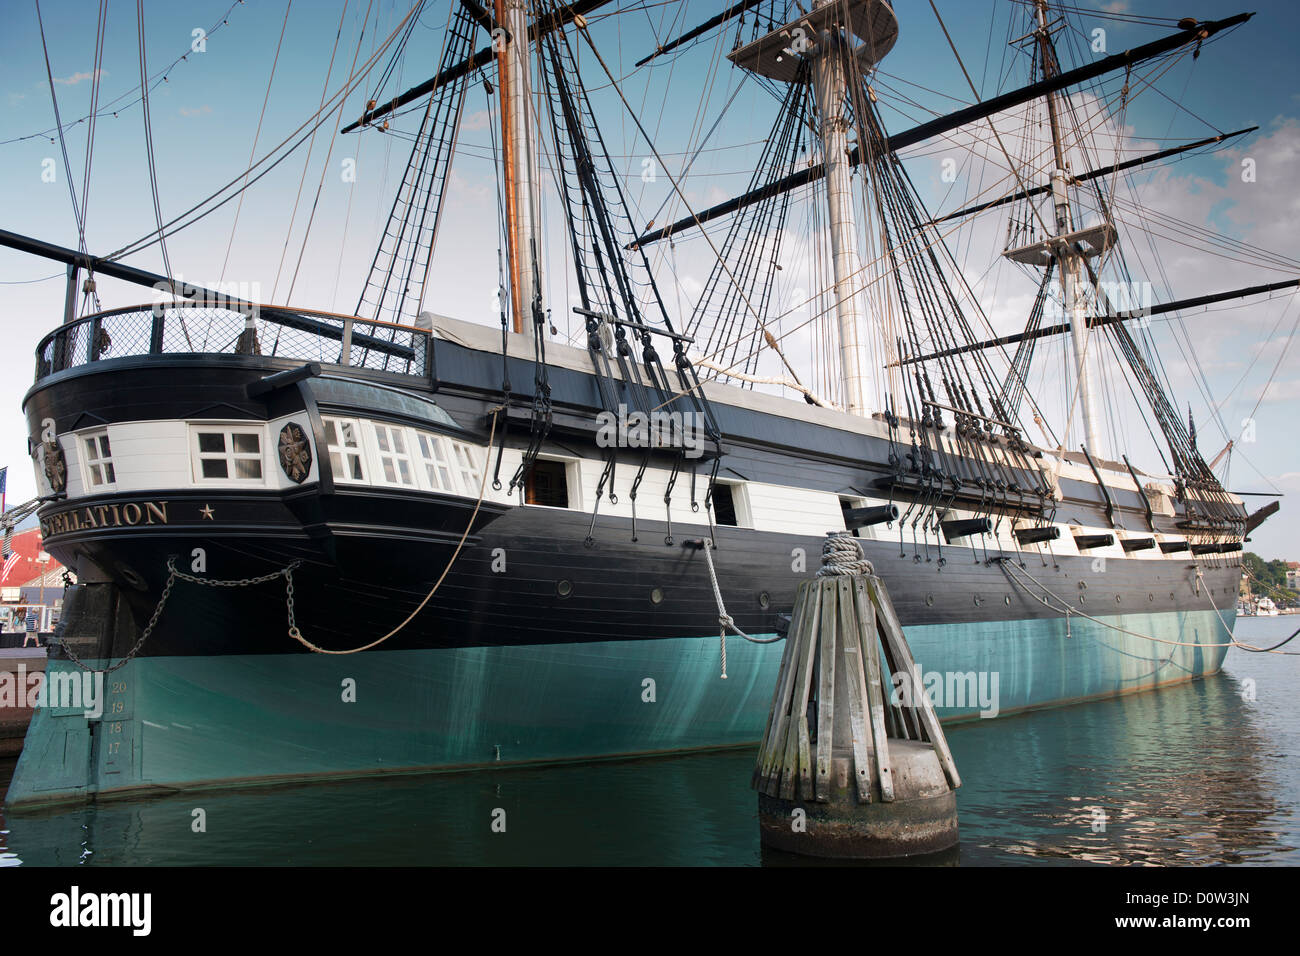 USS Constellation seen from the starboard quarter, Baltimore Stock Photo